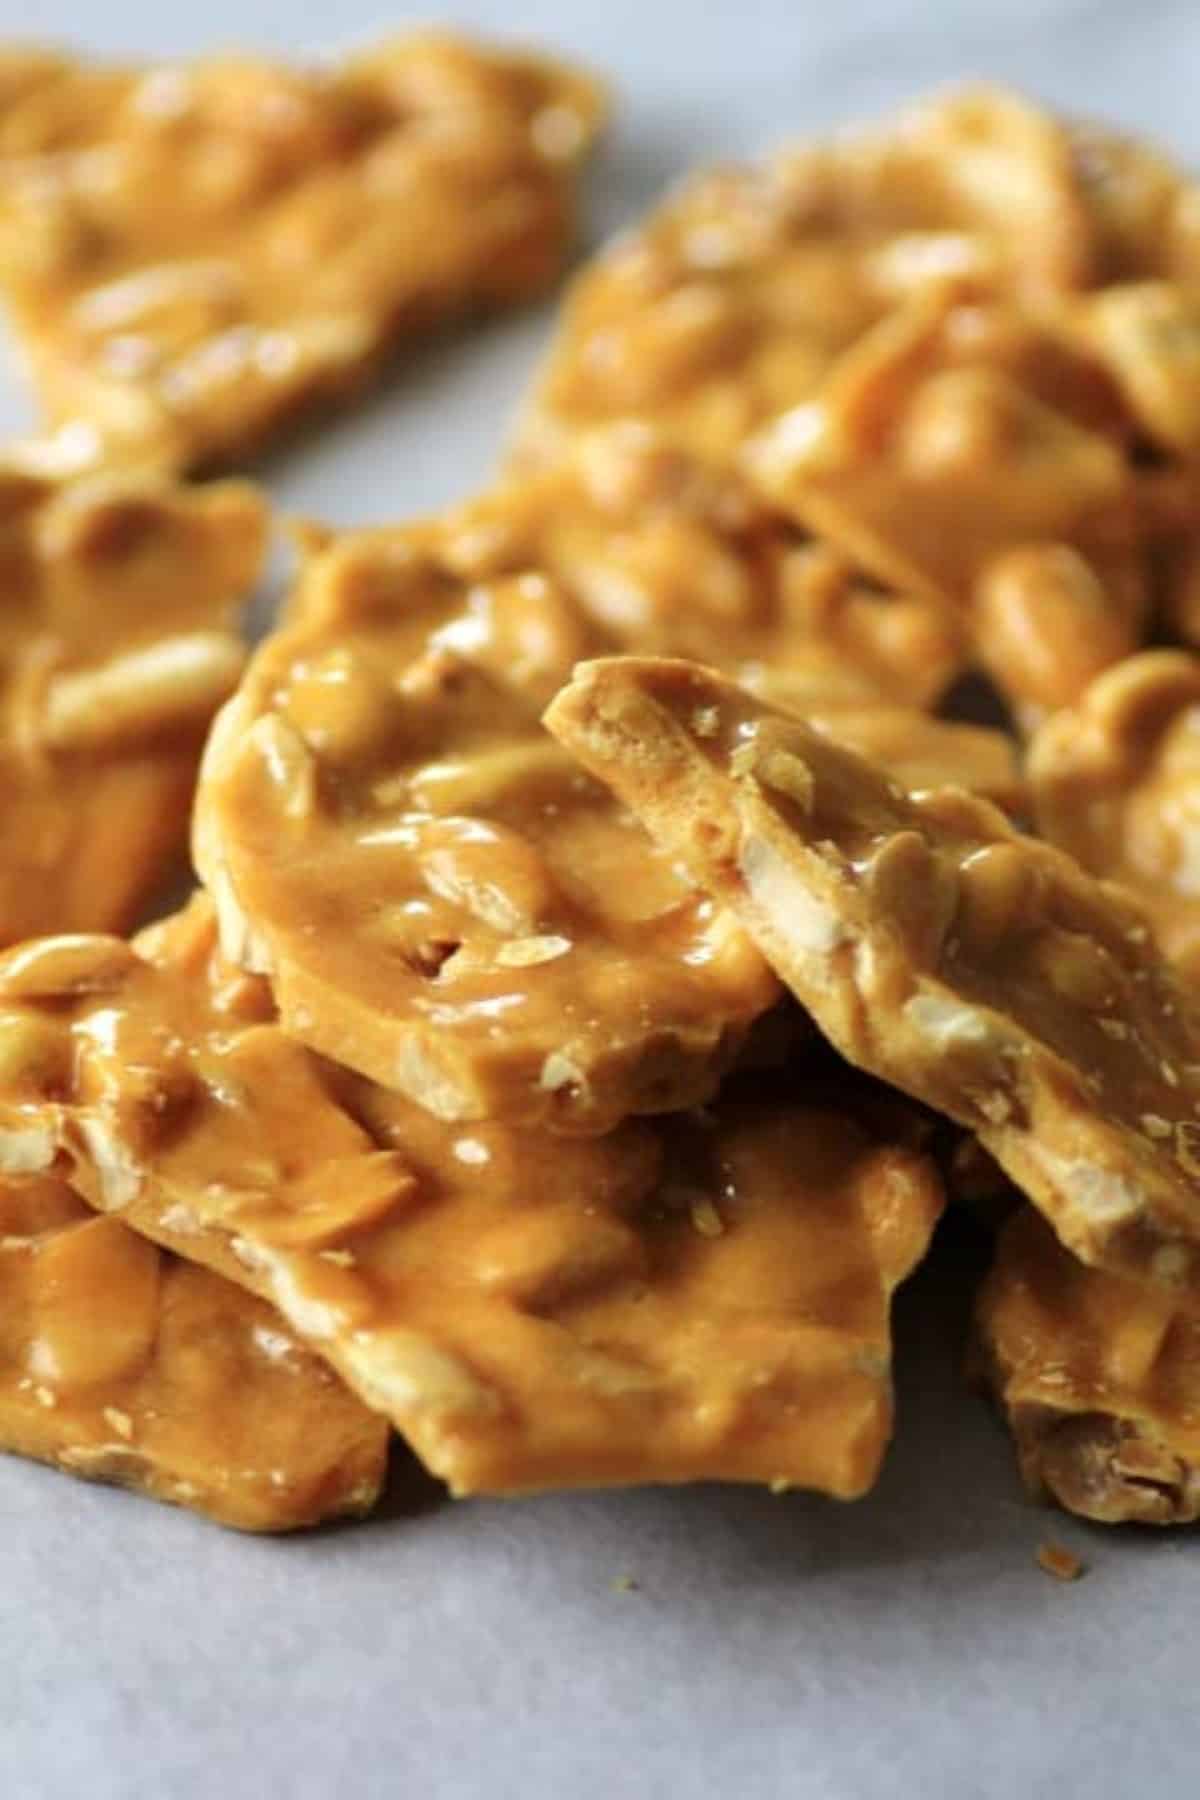 Peanut Brittle pieces stacked on a piece of parchment paper.